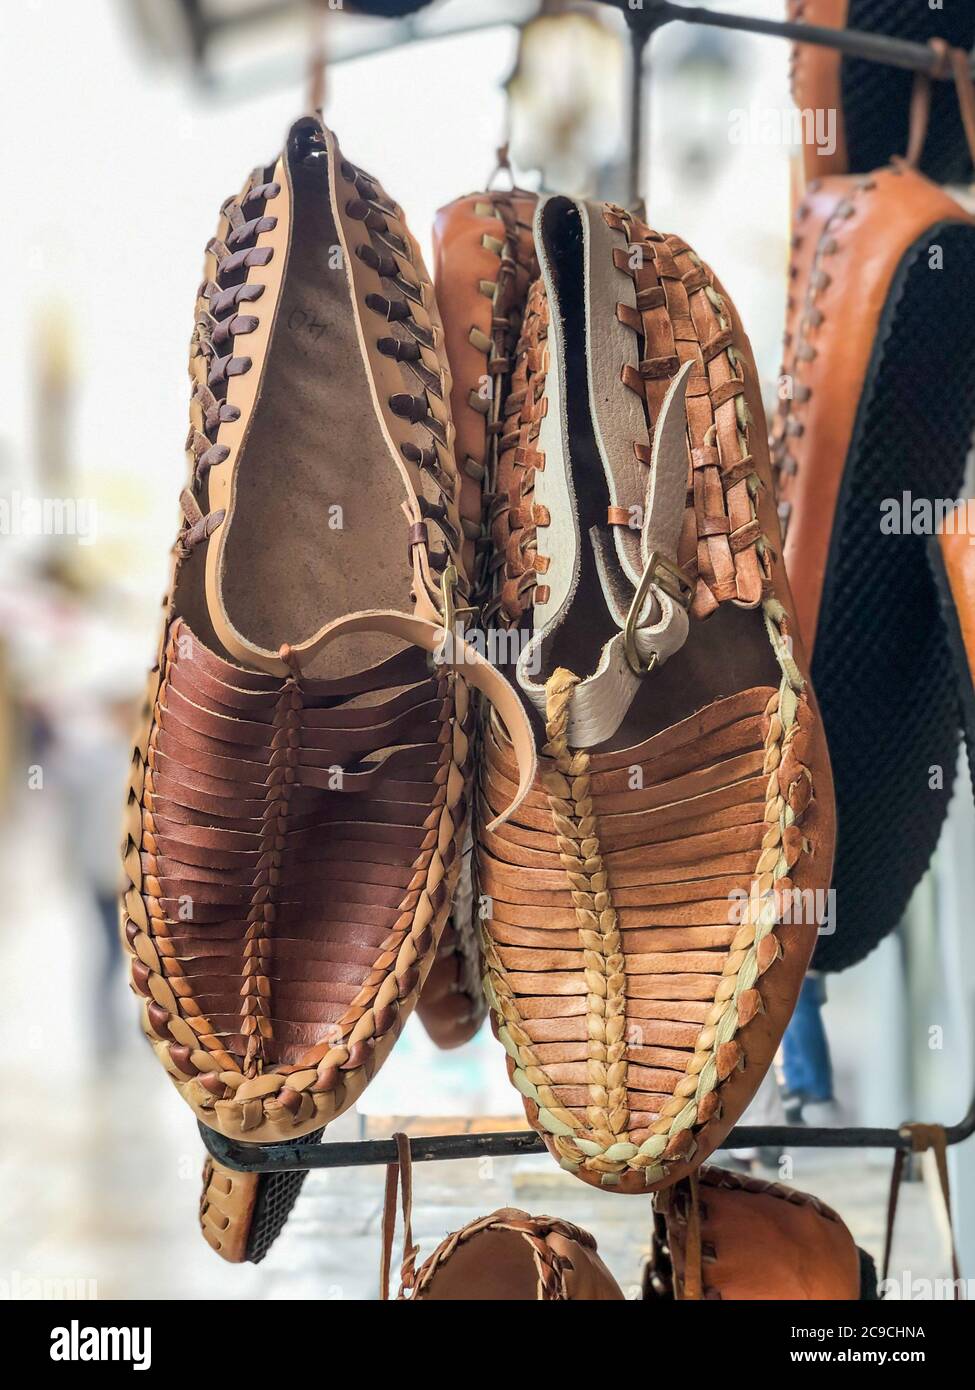 handmade leather shoes hanged in the bazaar in Turkey Stock Photo - Alamy